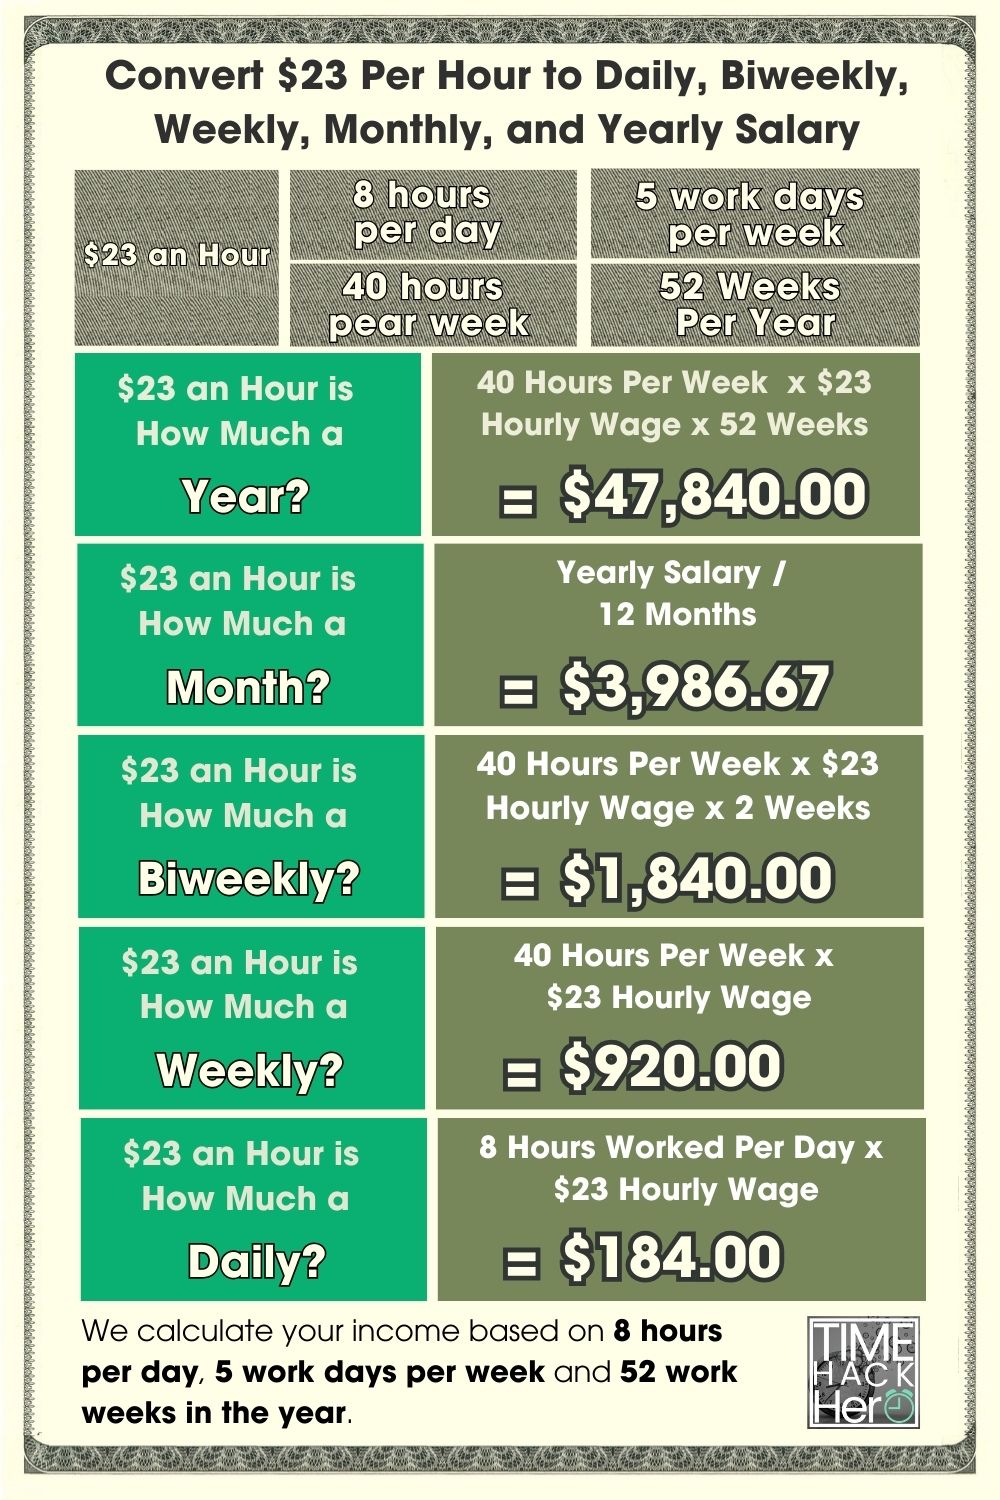 Convert $23 Per Hour to Daily, Biweekly, Weekly, Monthly, and Yearly Salary